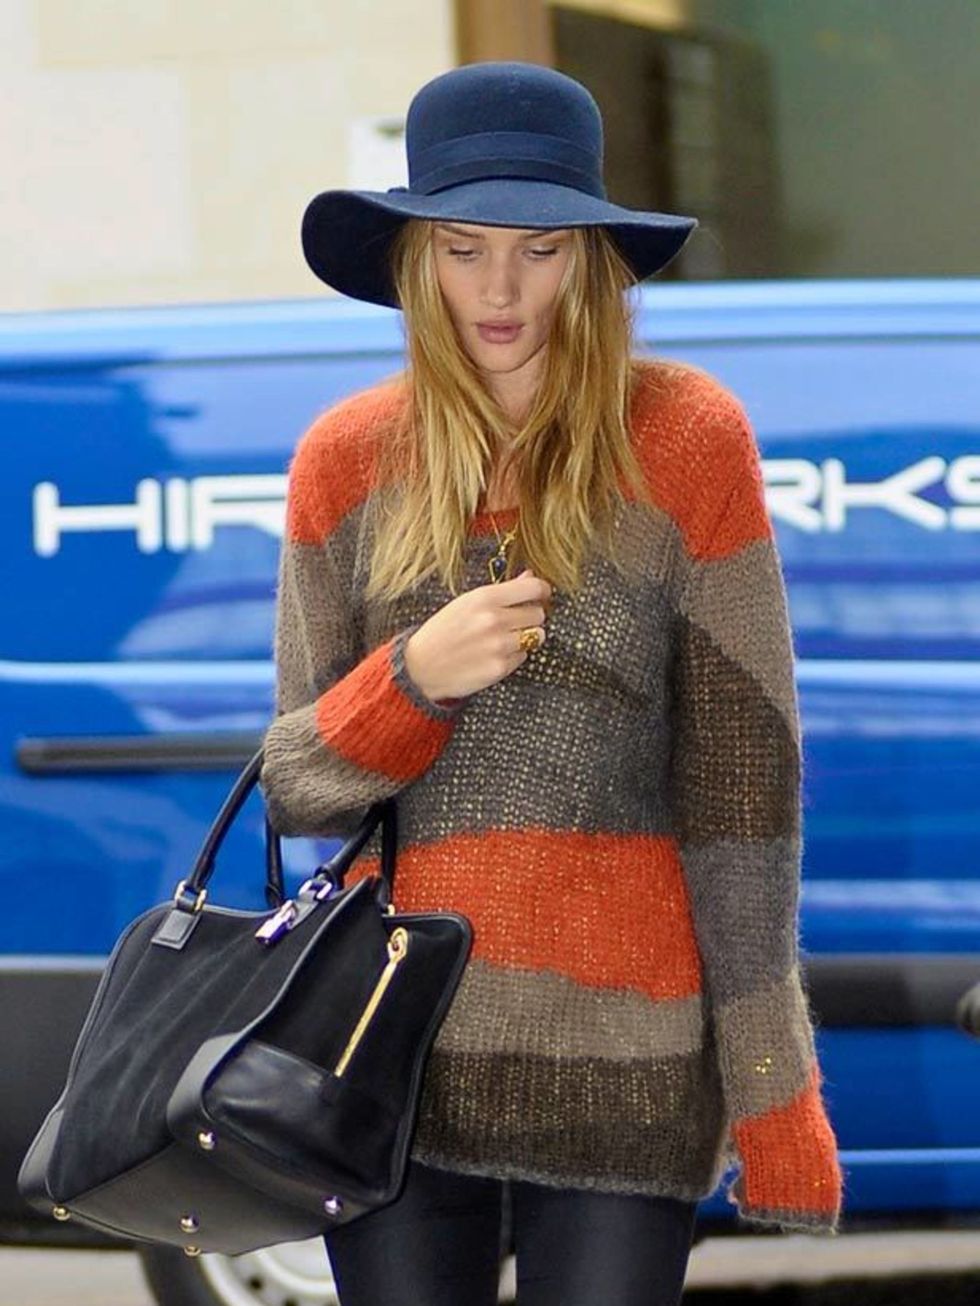 <p><a href="http://www.elleuk.com/starstyle/style-files/(section)/rosie-huntington-whiteley">Rosie Huntington-Whiteley</a> mixing a Joie striped jumper with a floppy 70s hat while out in London, October 2011</p>